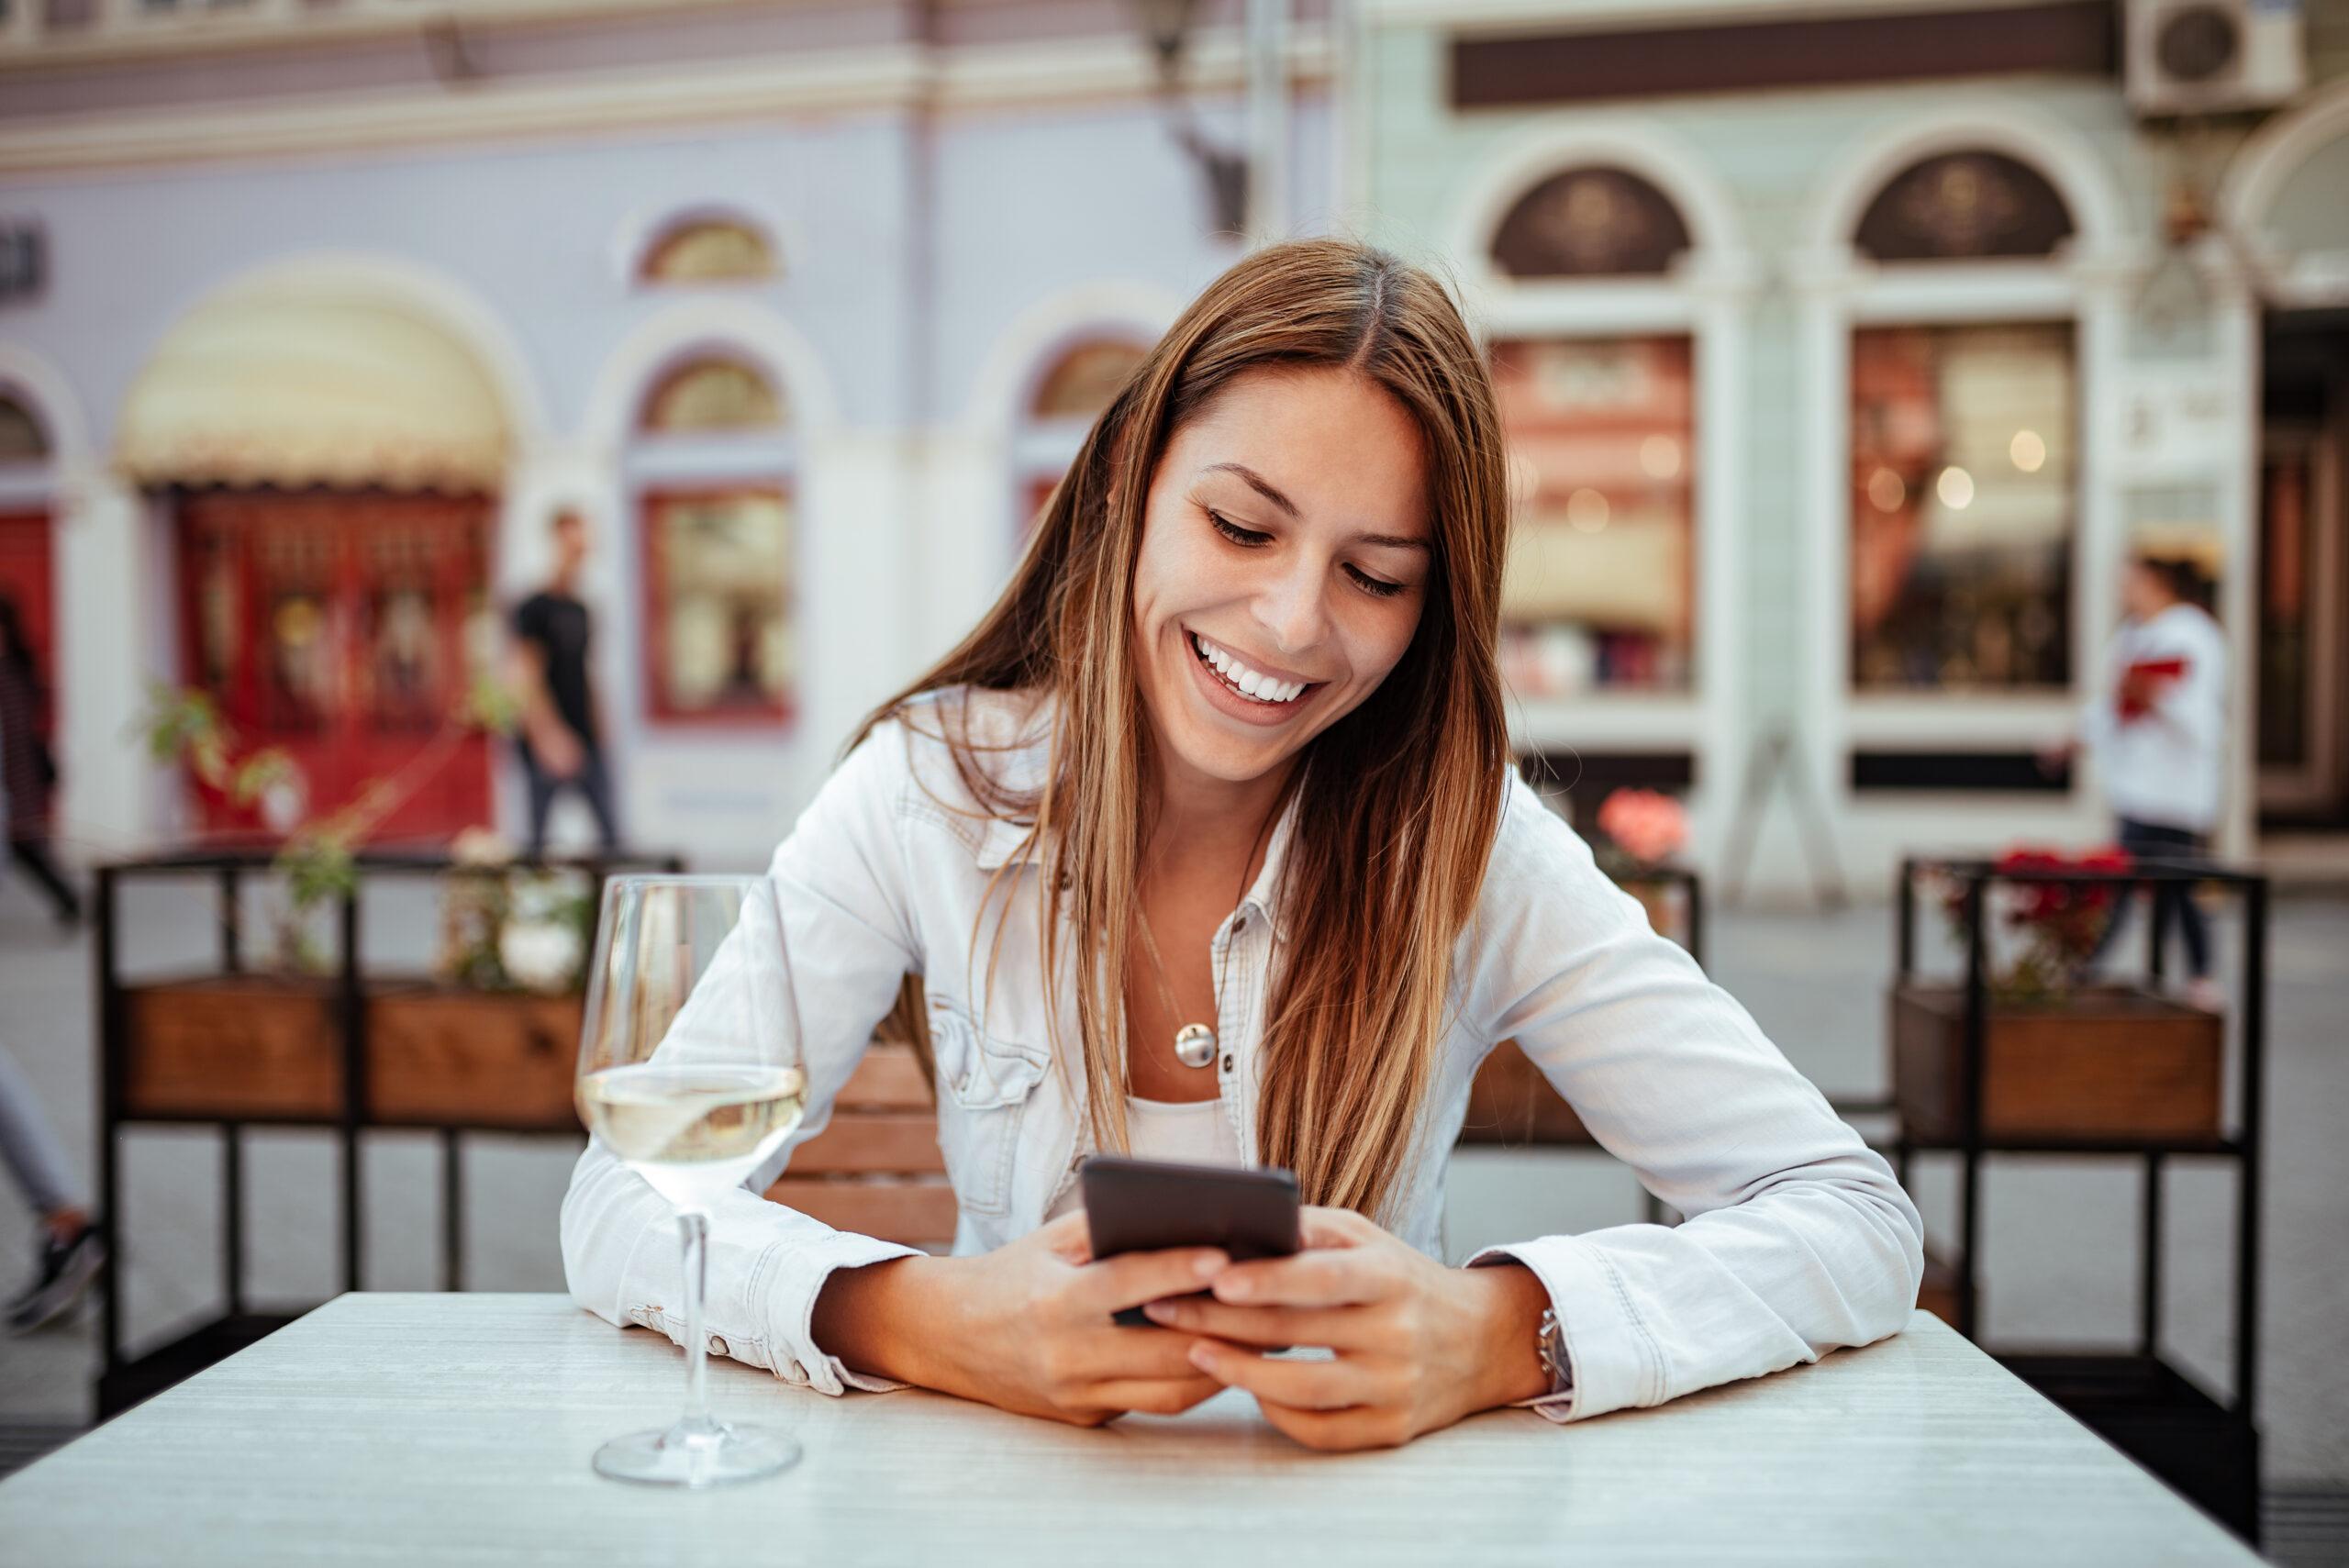 Young woman laughing while using phone at outdoor restaurant